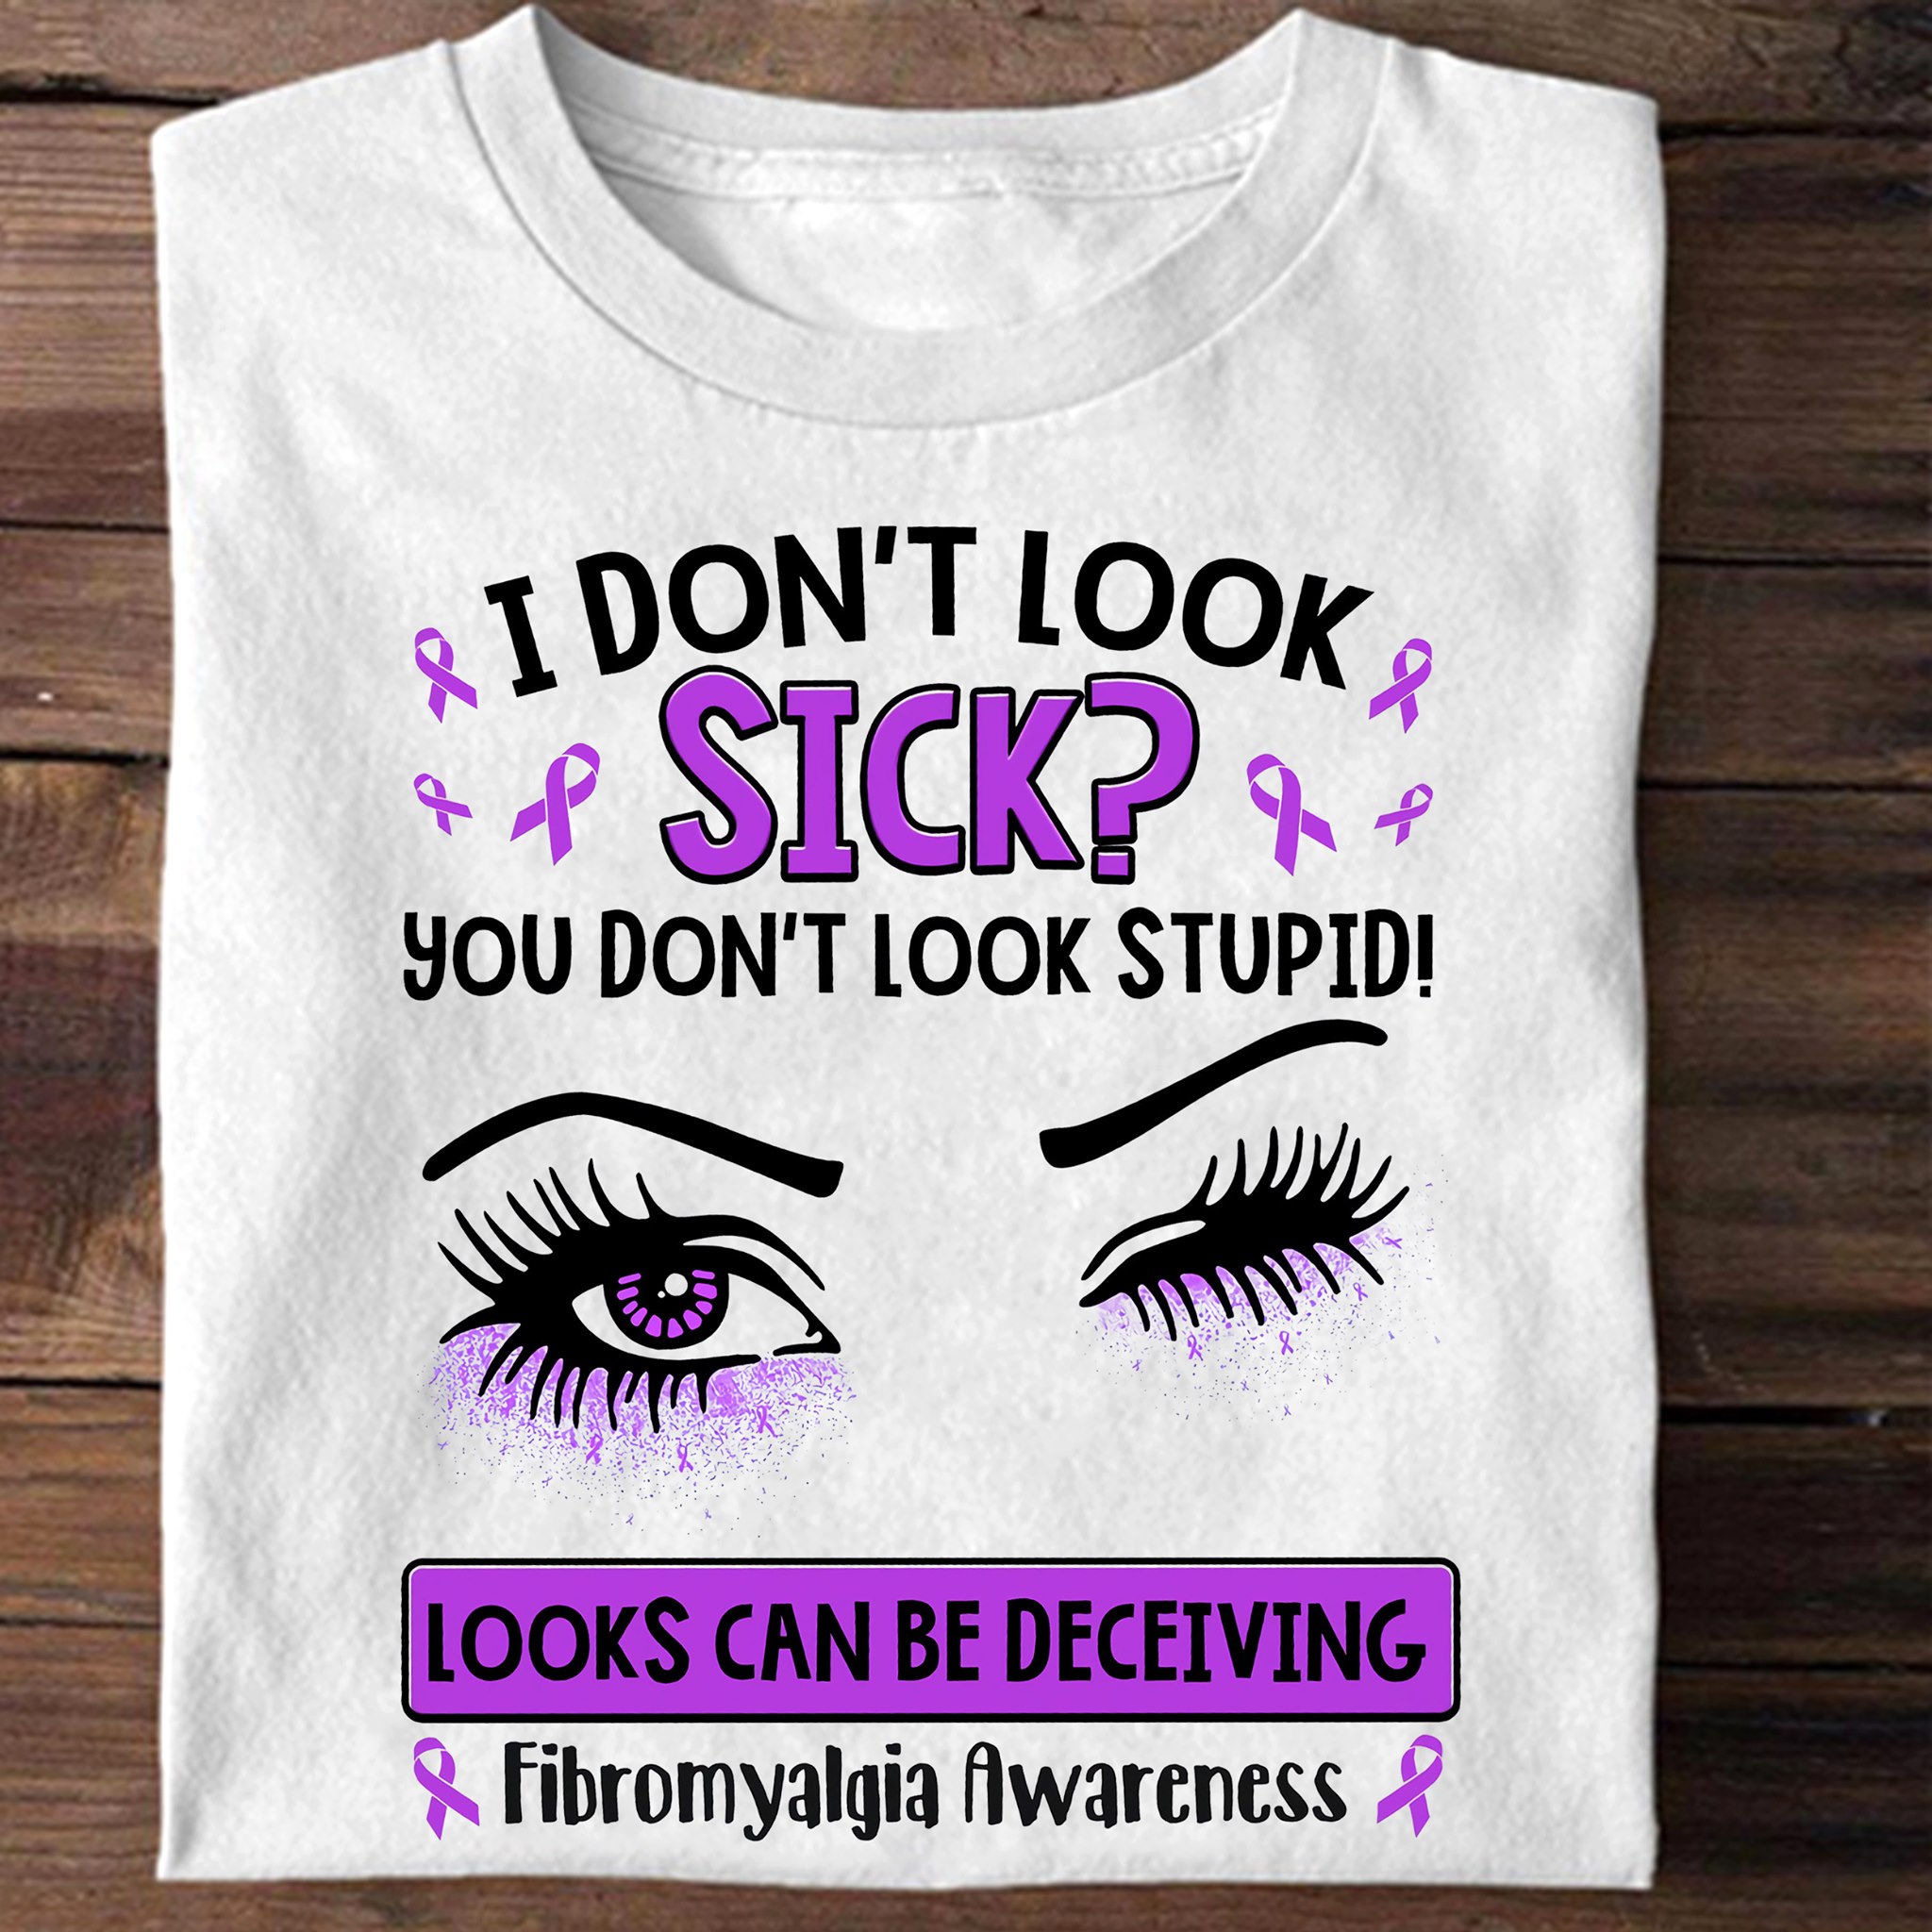 I don't look sick, you don't look stupid, looks can be deceiving - Fibromyalgia awareness